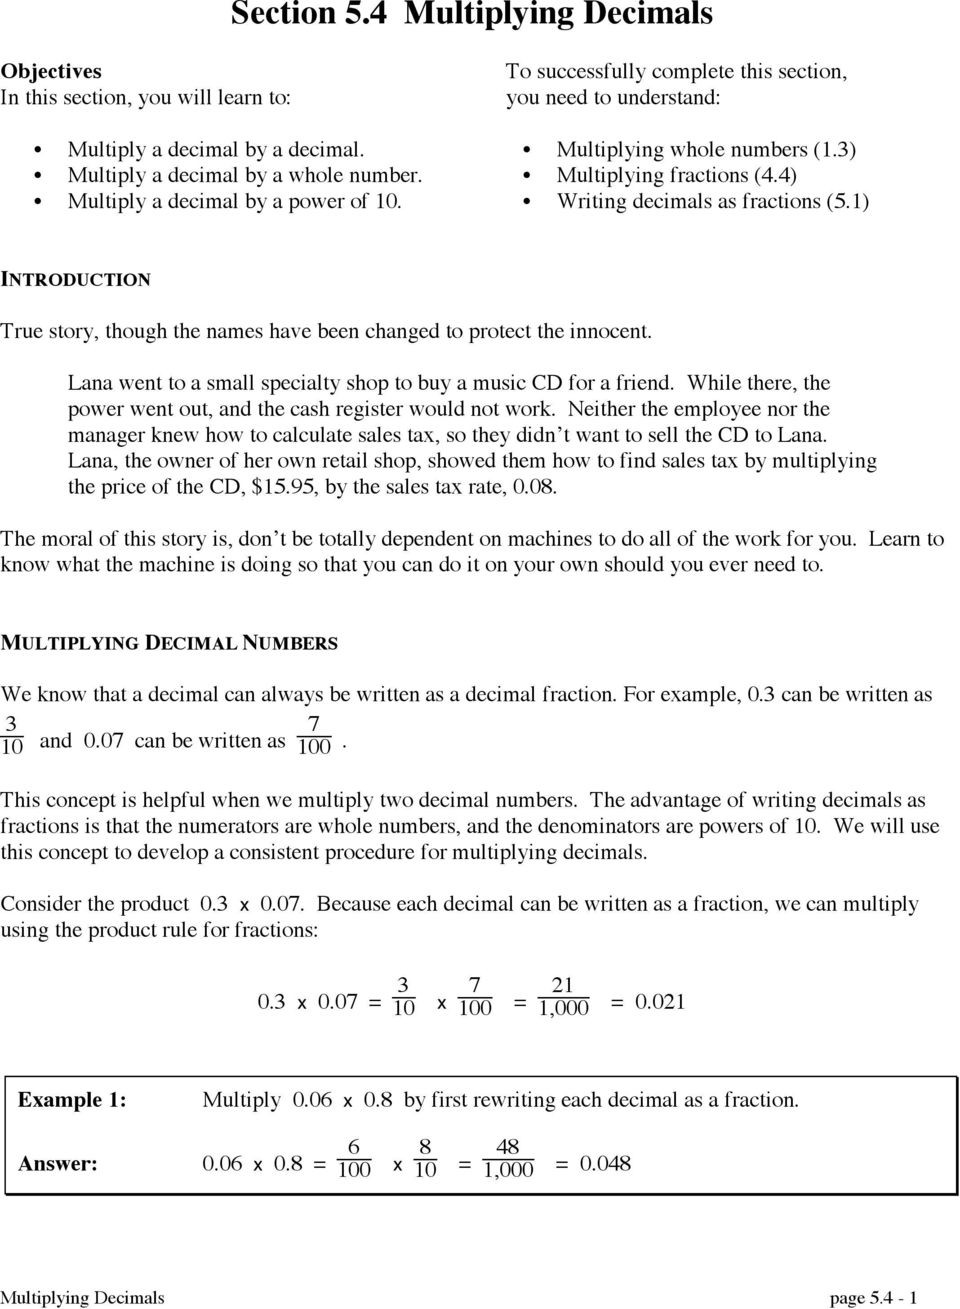 Terminating and Repeating Decimals Worksheet Section 5 4 Multiplying Decimals Pdf Free Download